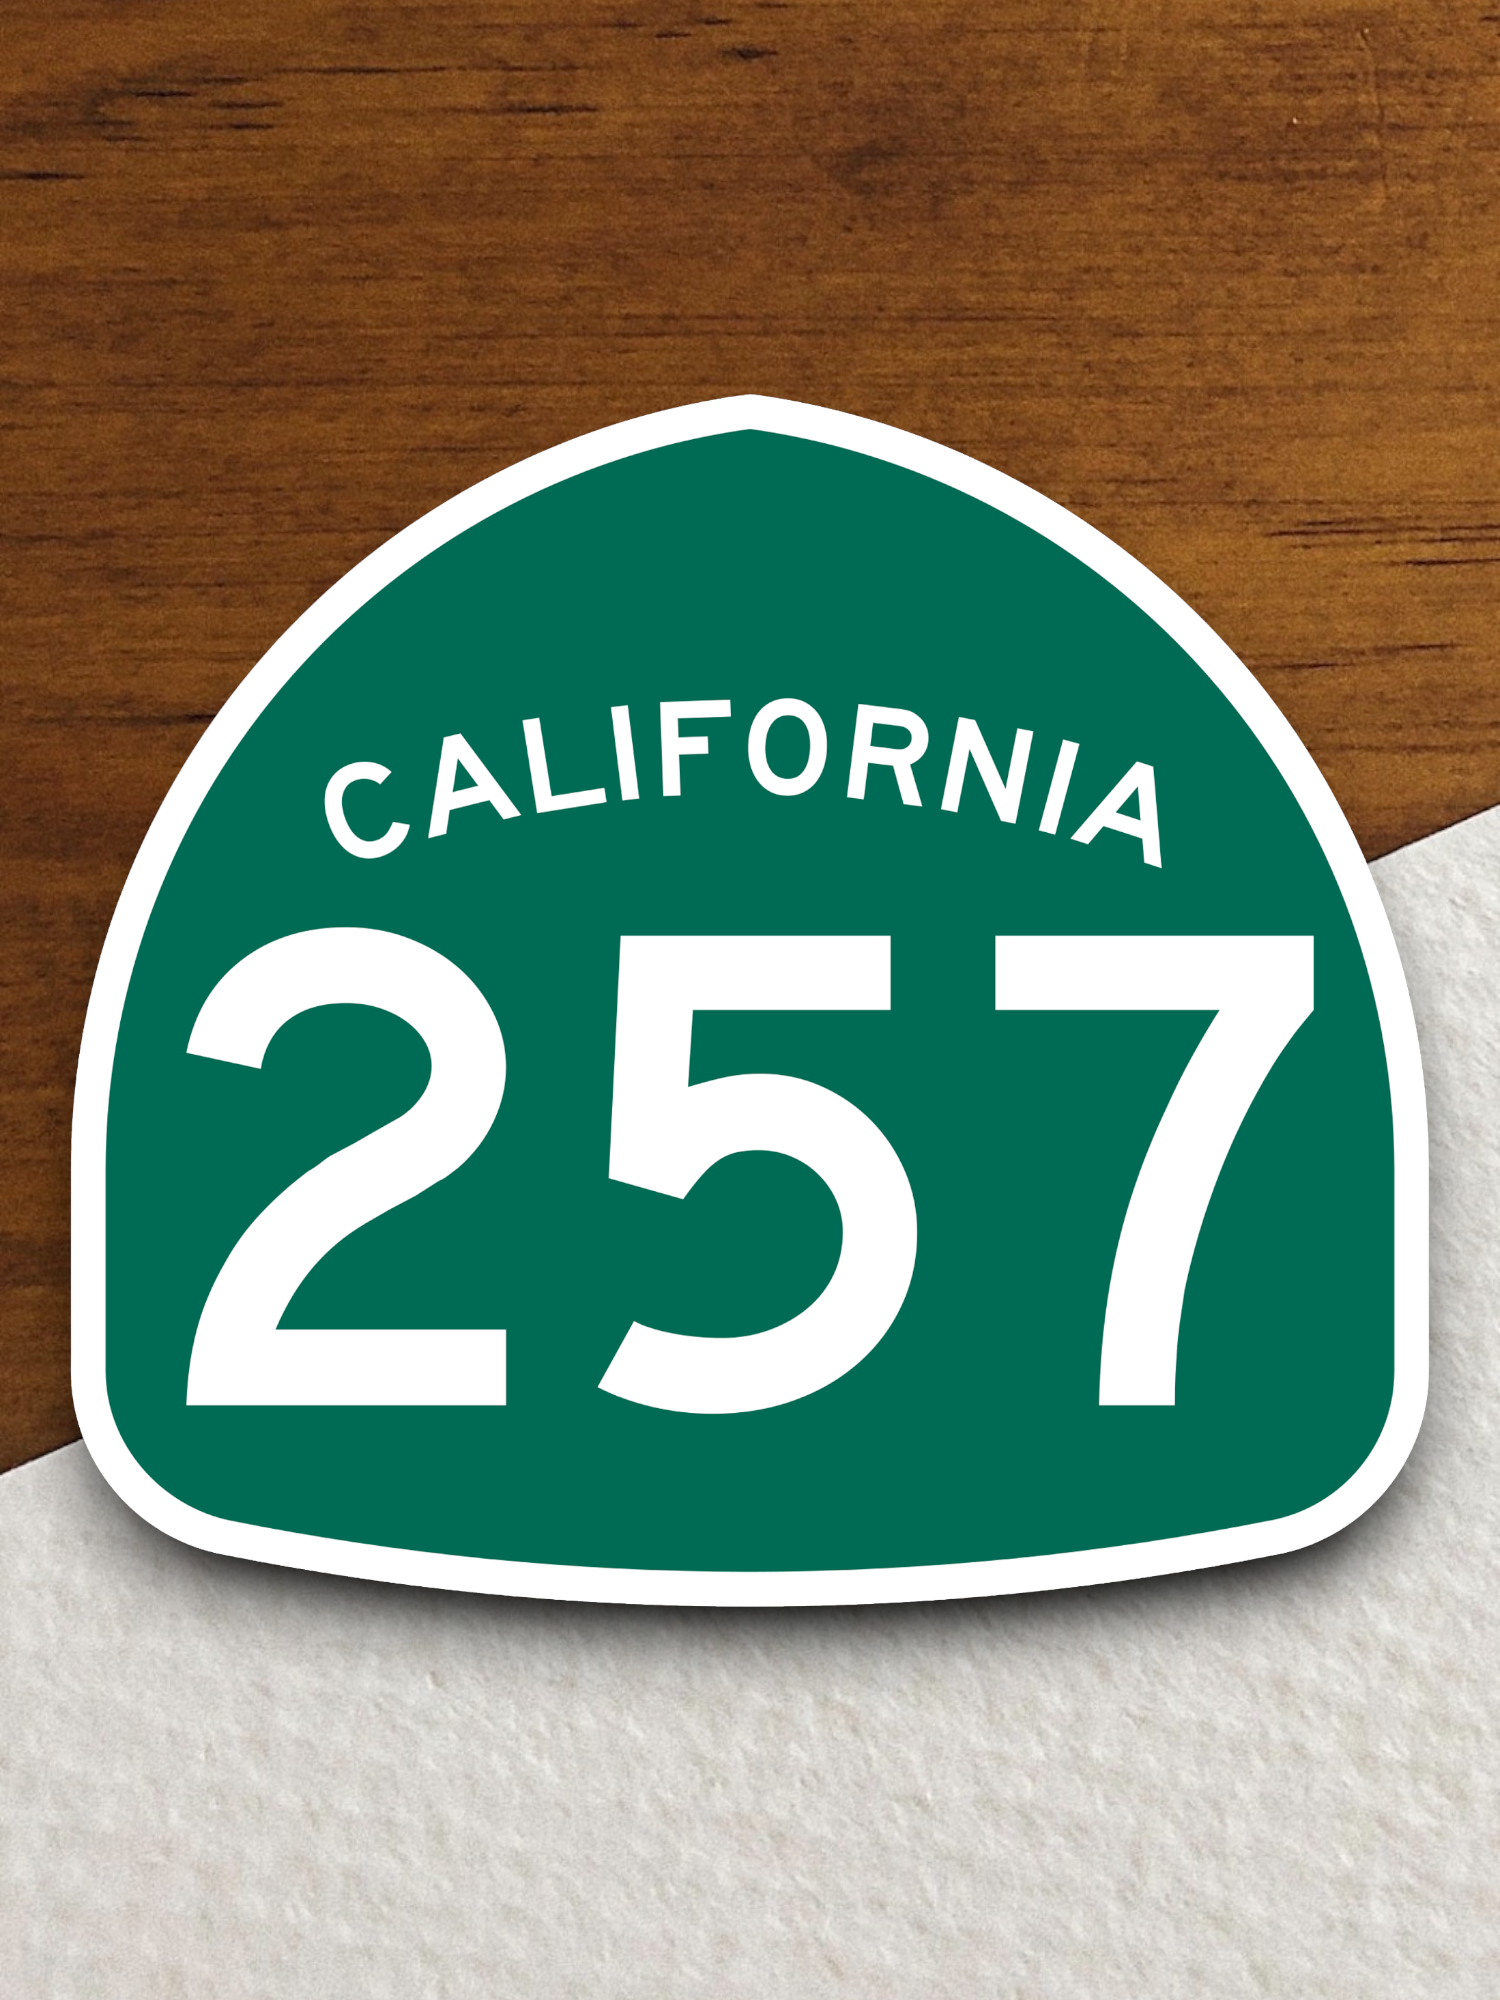 California State Route 257 Road Sign Sticker